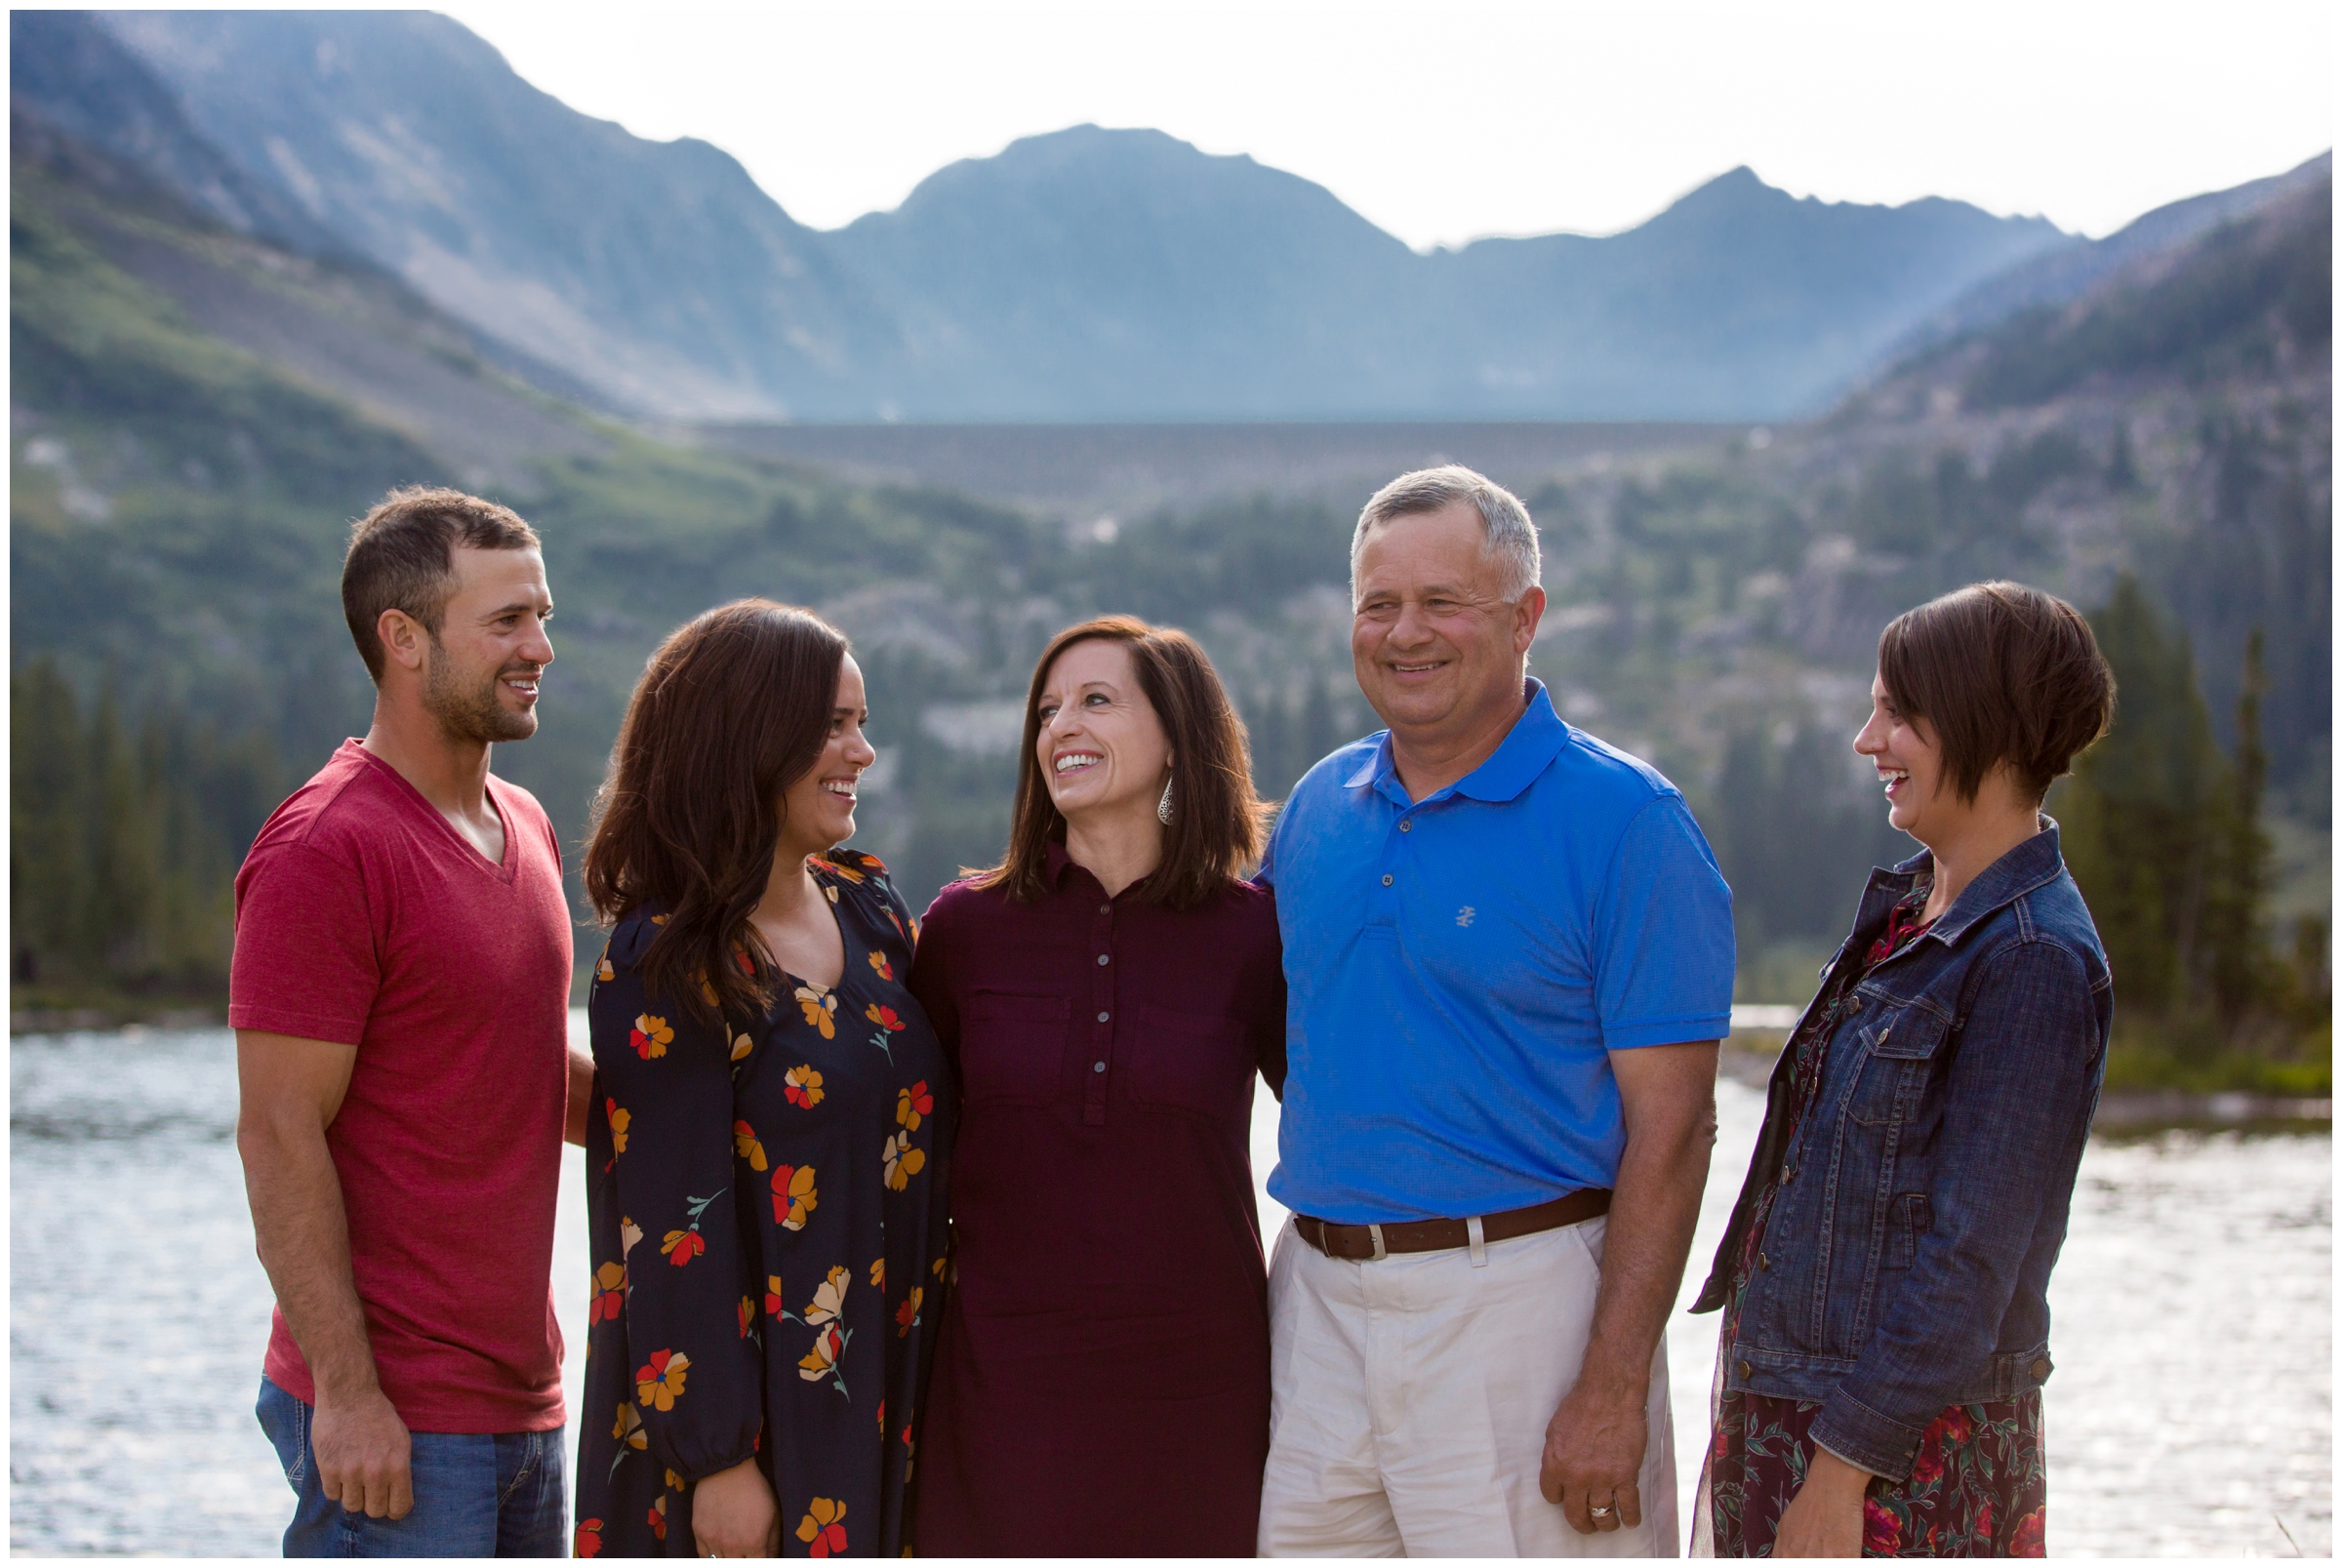 Breckenridge Colorado family pictures at Blue Lakes - Monte Cristo Gulch by award-winning portrait photographer Plum Pretty Photography